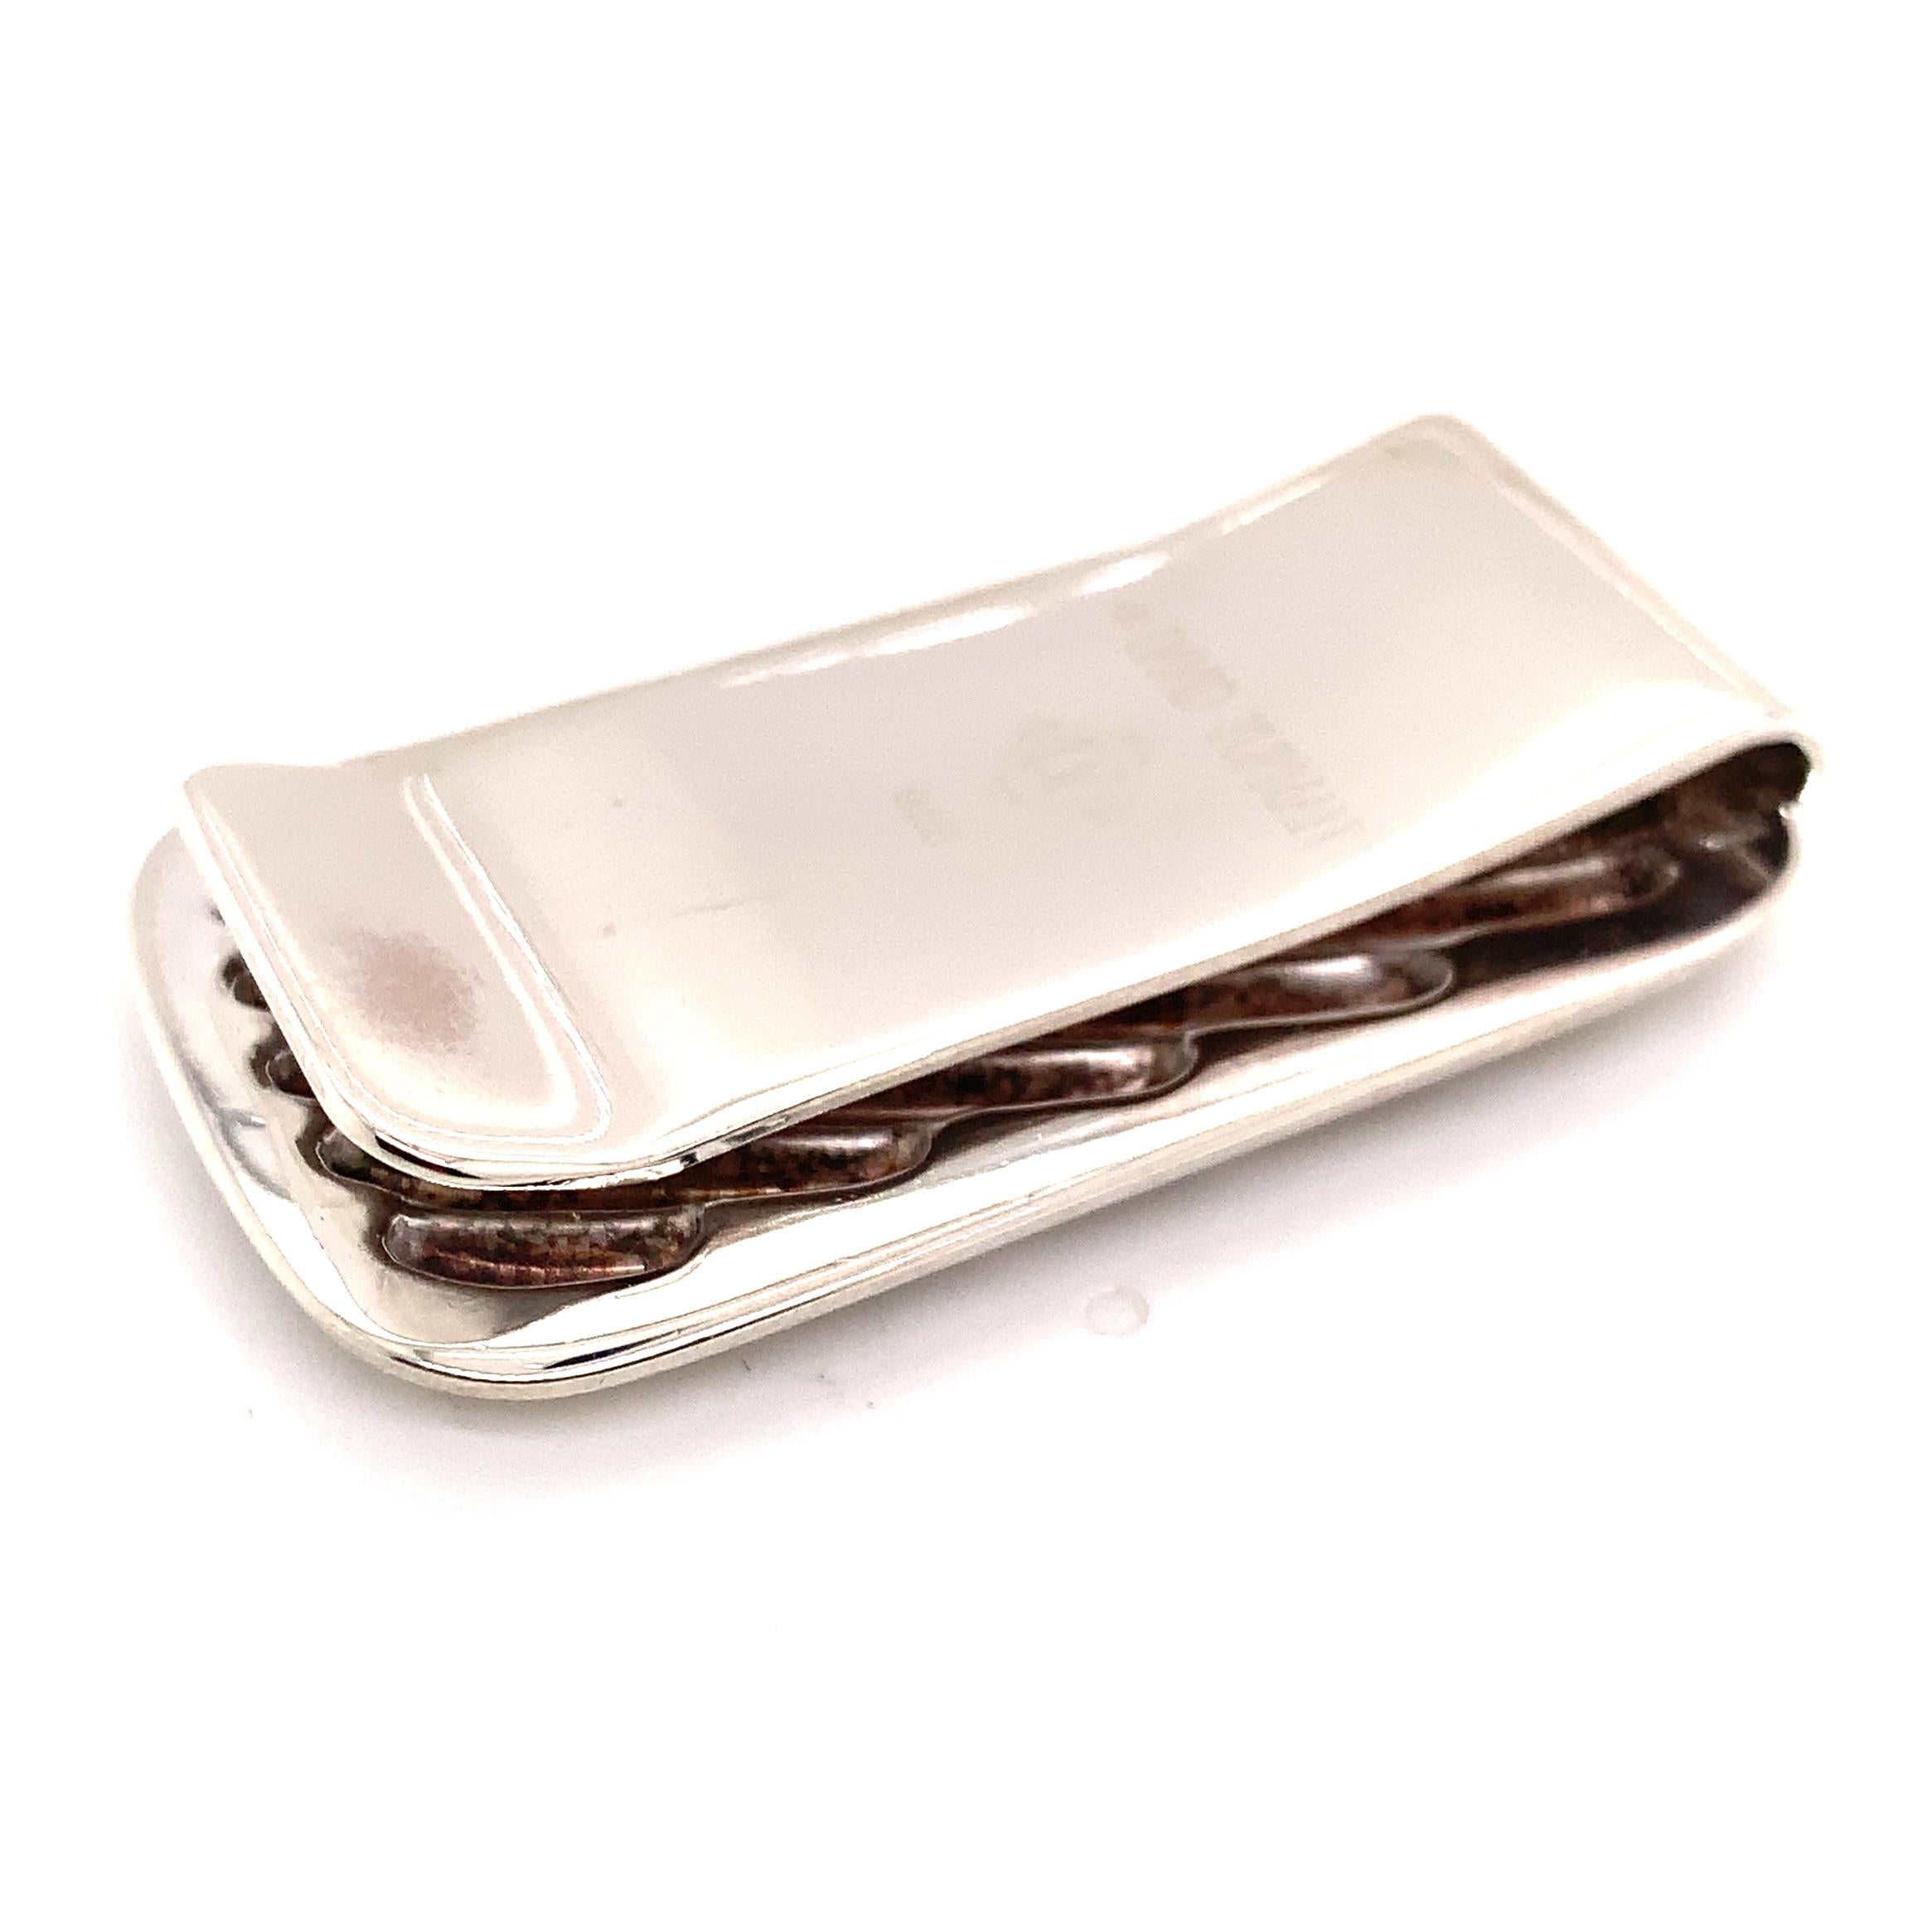 David Yurman Estate Large Cable Money Clip Sterling Silver DY126

999.00$

TRUSTED SELLER SINCE 2002

PLEASE SEE OUR HUNDREDS OF POSITIVE FEEDBACKS FROM OUR CLIENTS!!

FREE SHIPPING

This elegant Authentic David Yurman Men's sterling silver money